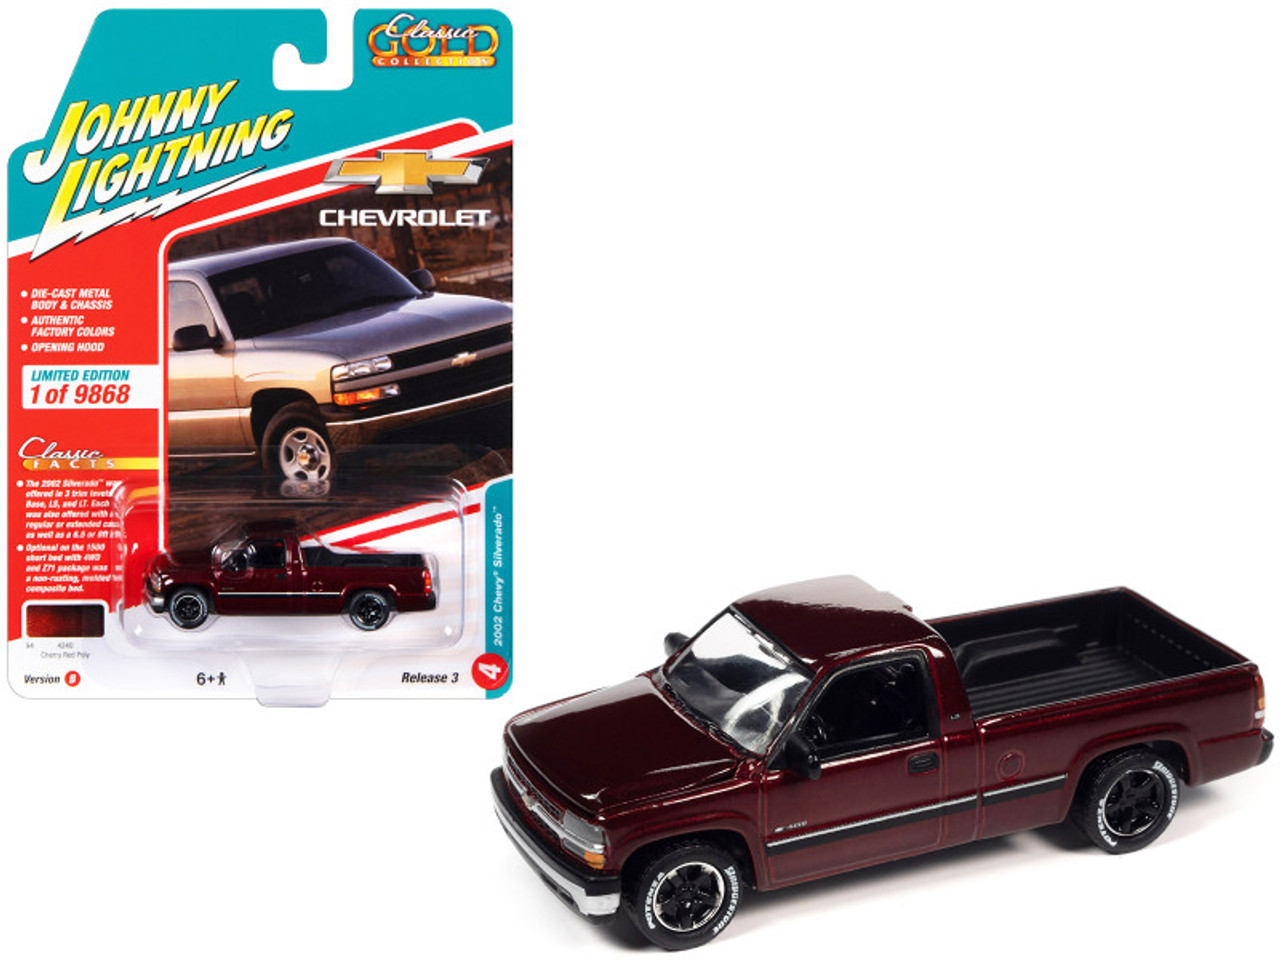 2002 Chevrolet Silverado Pickup Truck Cherry Red Metallic "Classic Gold Collection" Series Limited Edition to 9868 pieces Worldwide 1/64 Diecast Model Car by Johnny Lightning